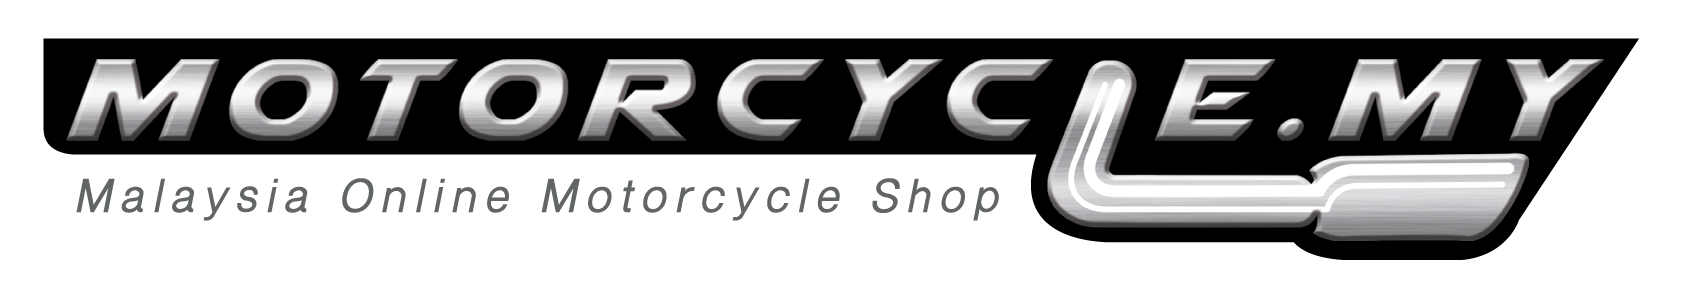  - The Largest Online Motorcycle Shop in Malaysia